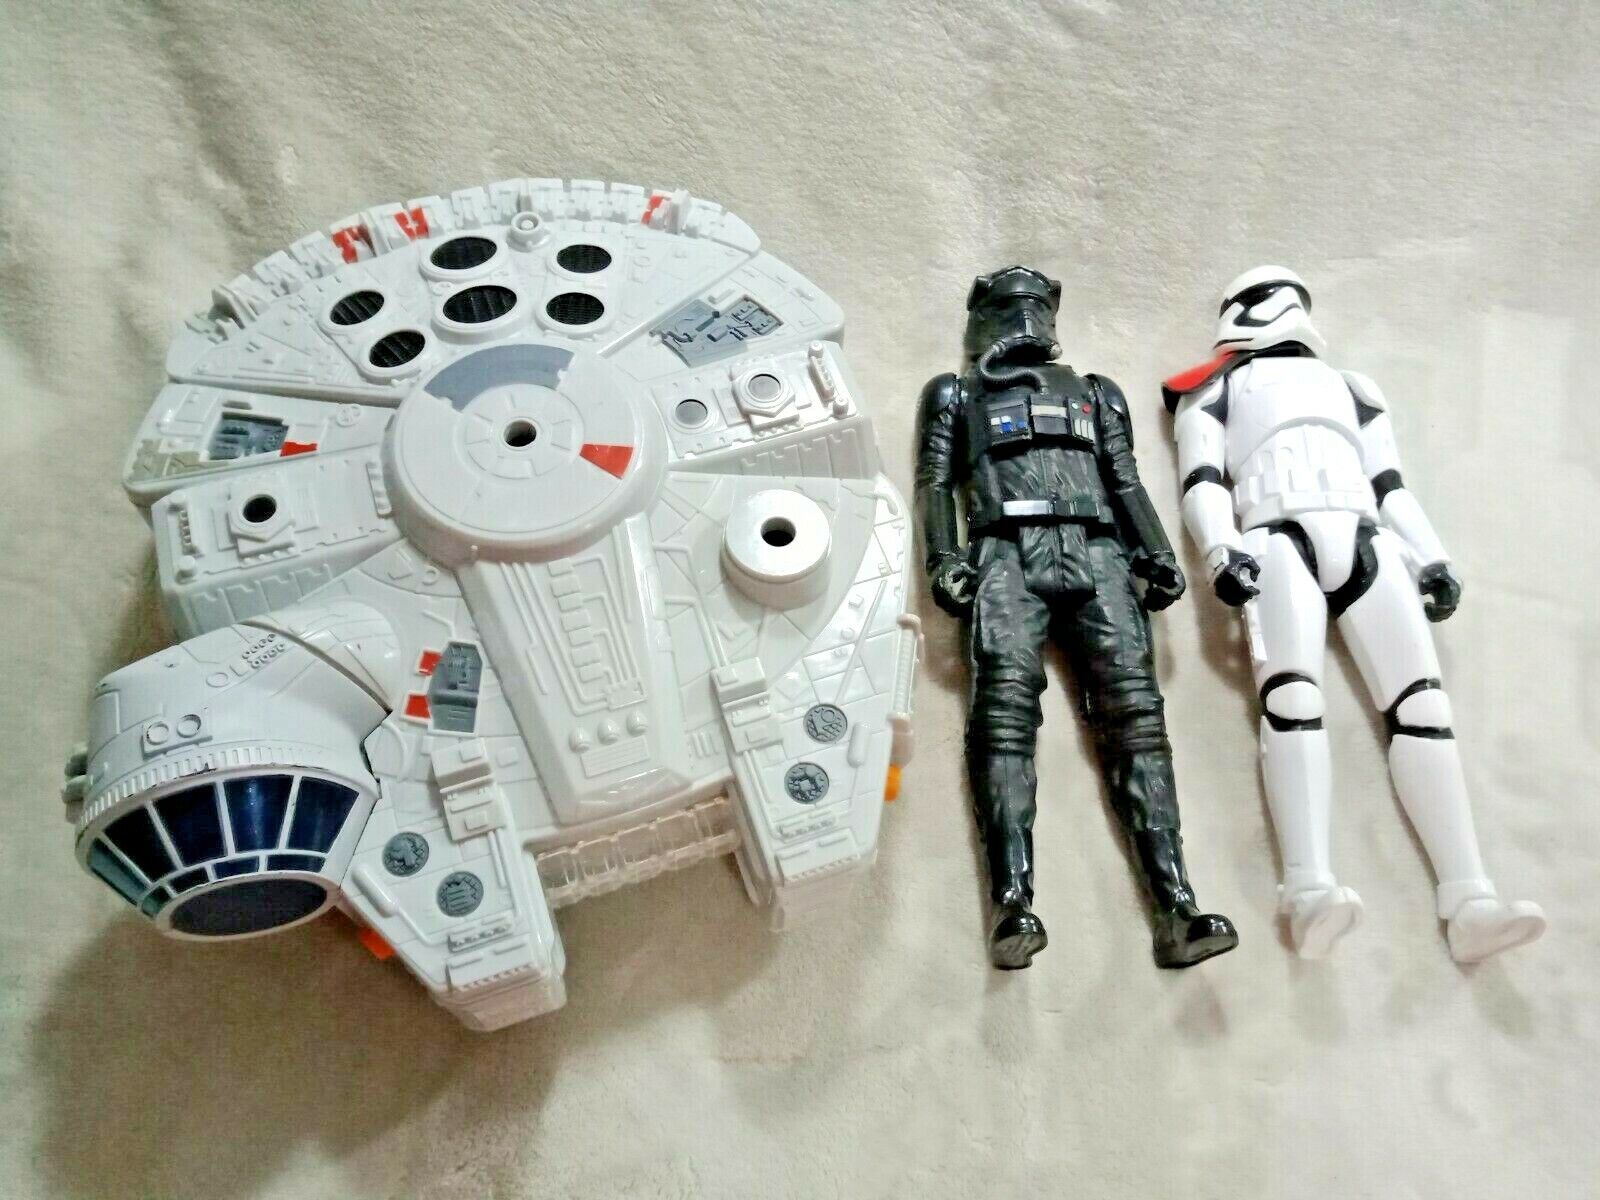 2011 Star Wars Millennium Falcon with 1 Tie Fighter and 1 Storm Trooper lot of 3